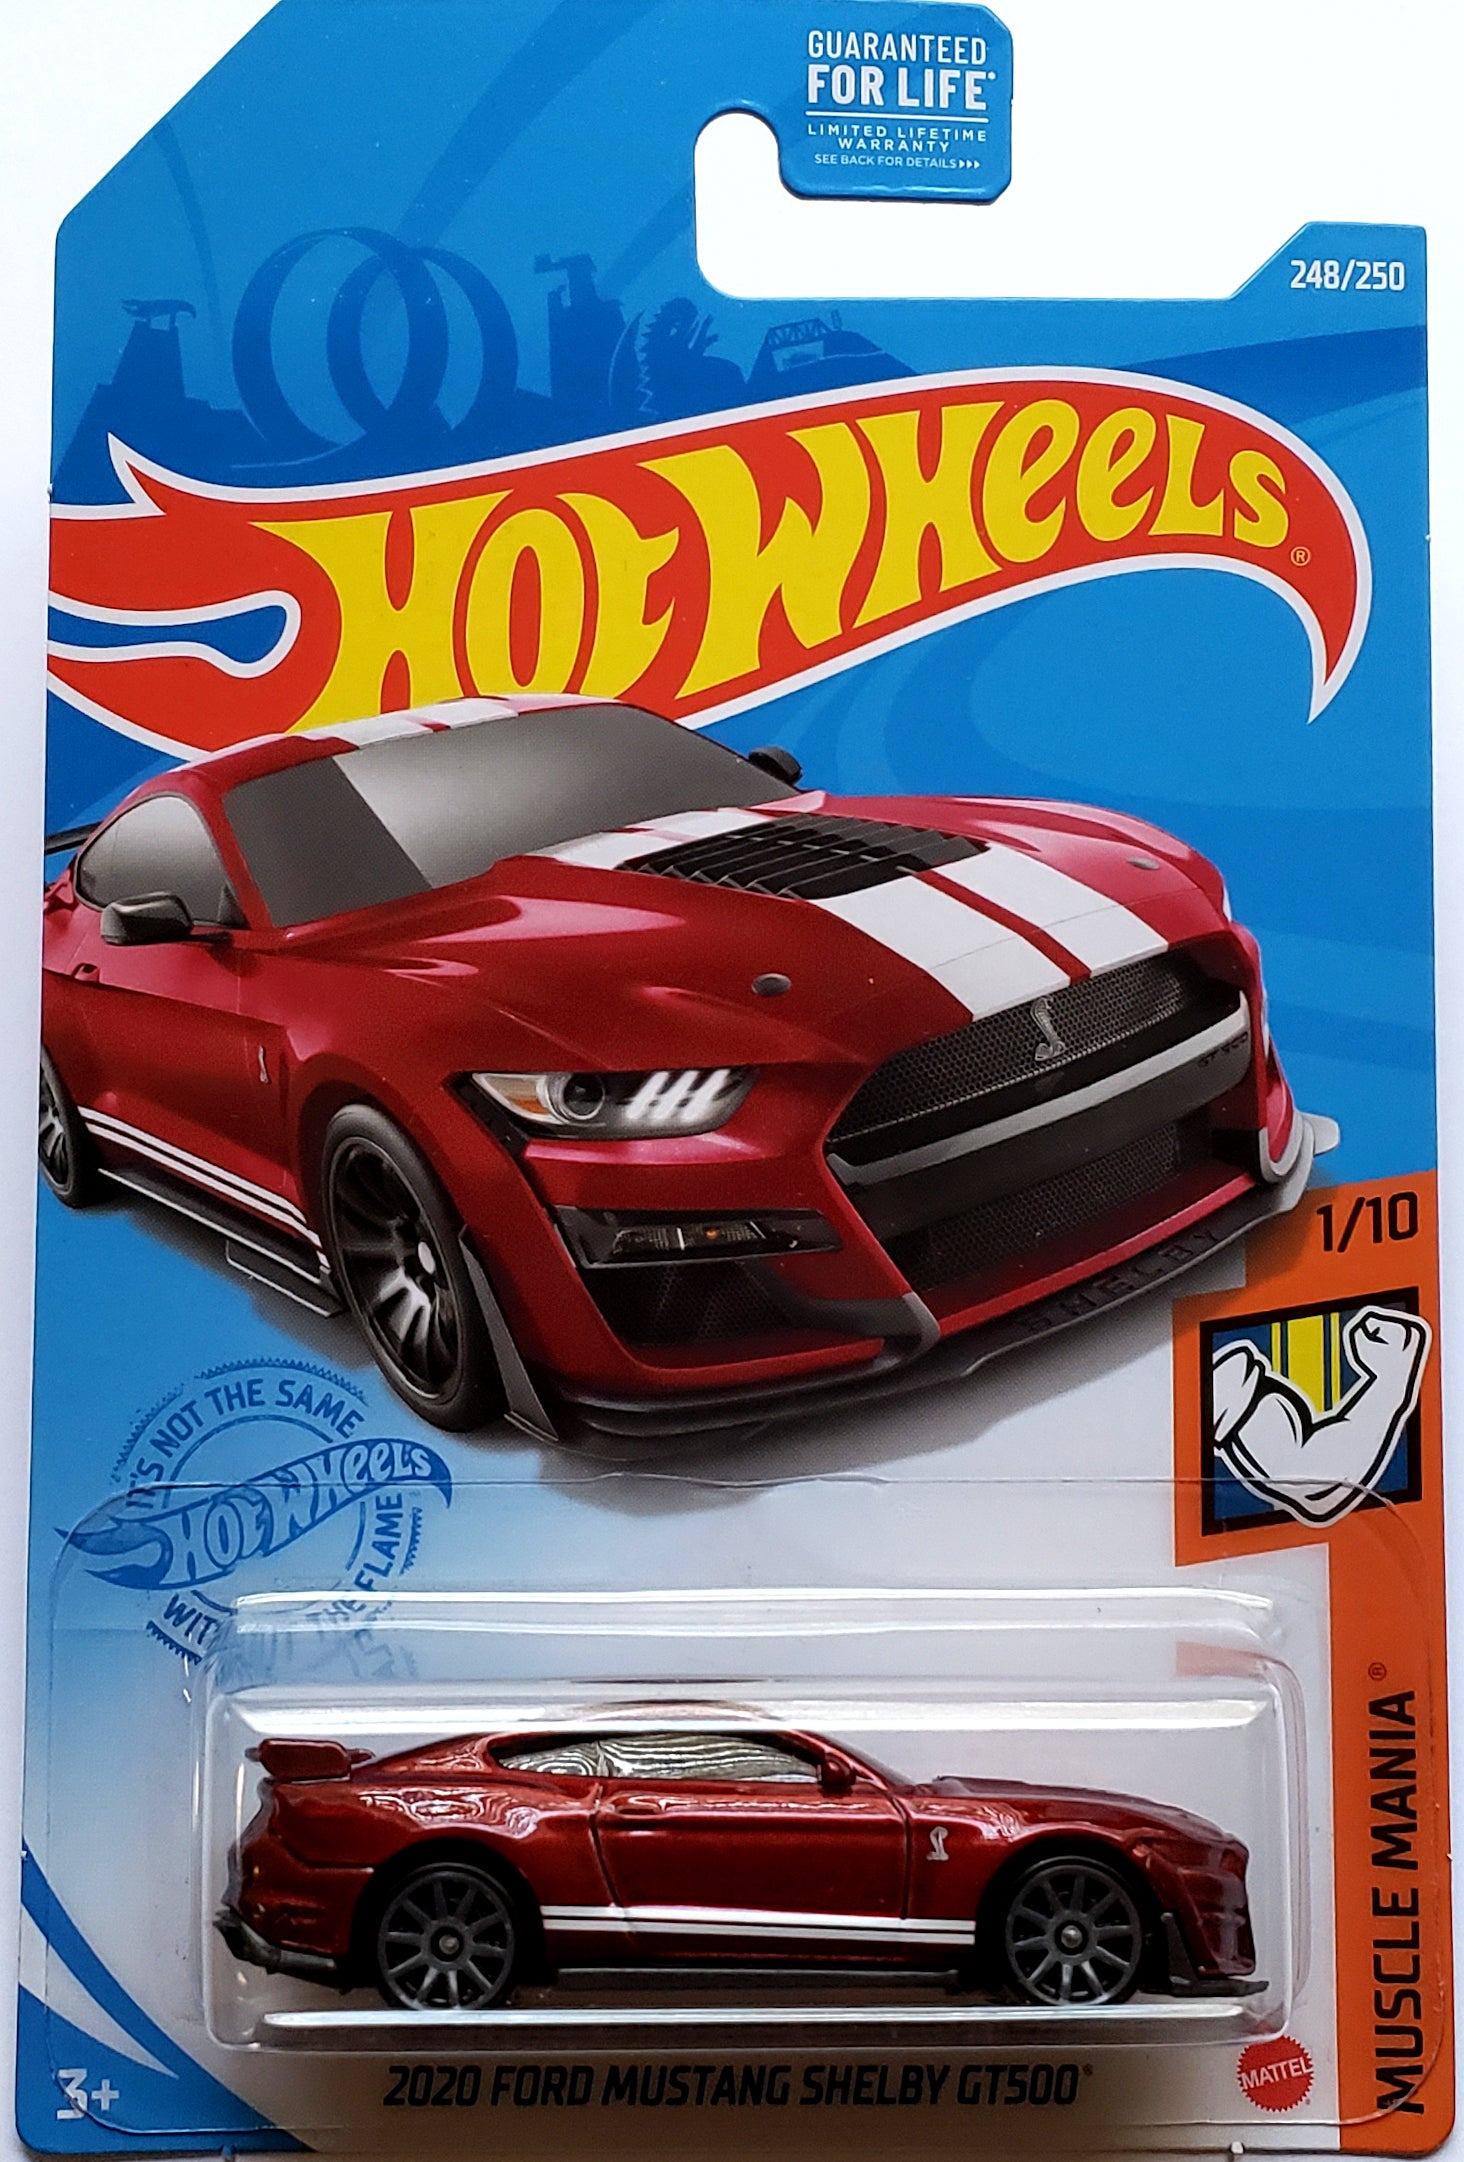 2020 Hot Wheels Mainline #248 - 2020 Ford Mustang Shelby GT500 (GS Exclusive Red) GTD38